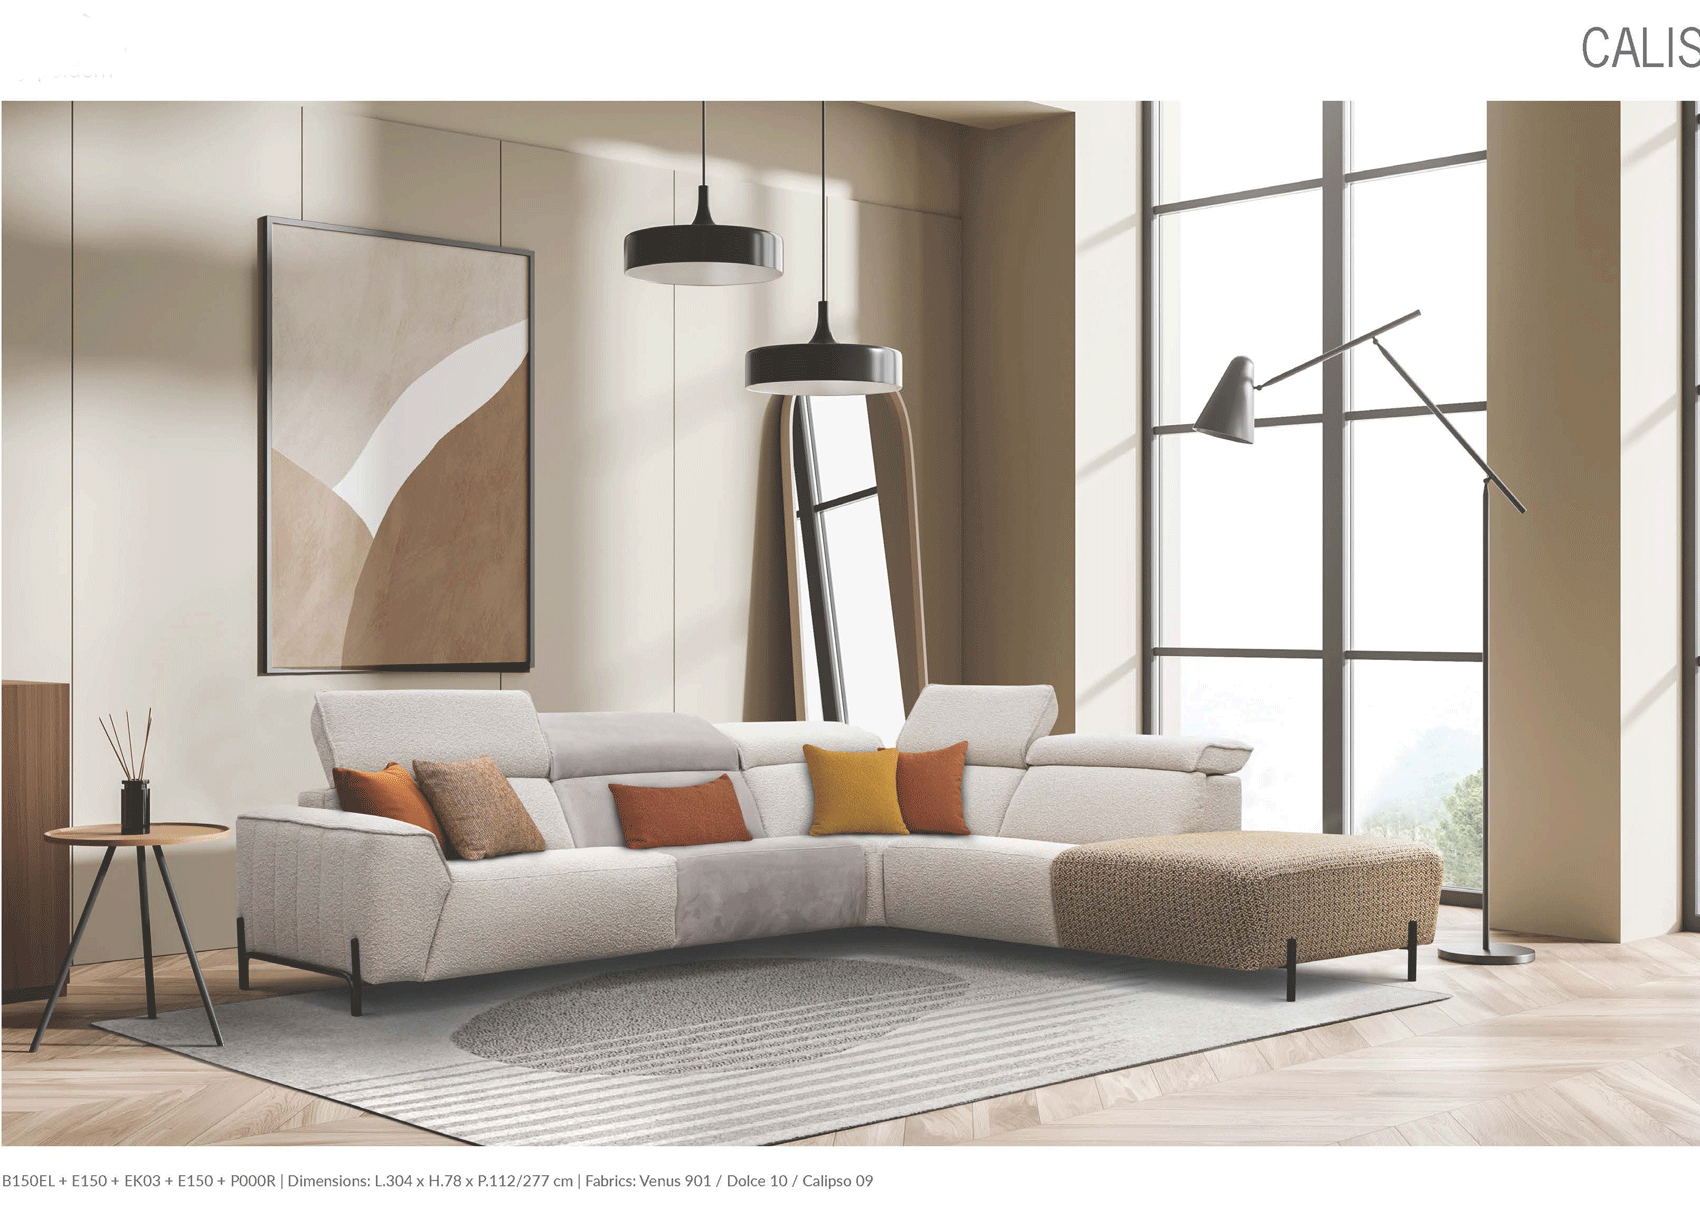 Living Room Furniture Sleepers Sofas Loveseats and Chairs Calis Sectional